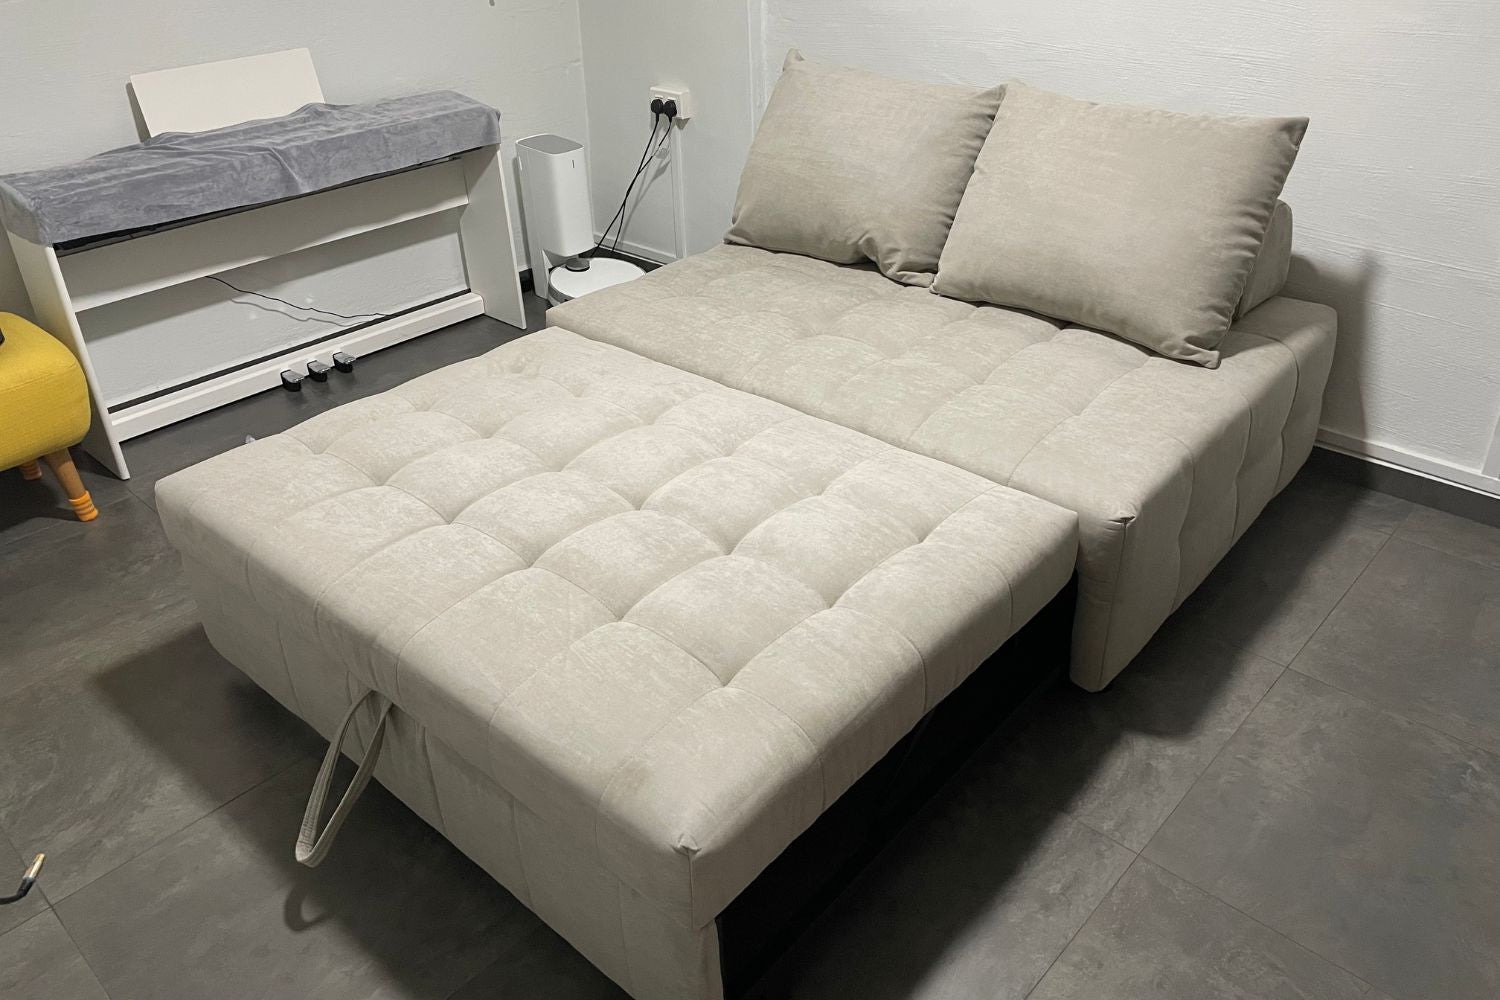 Candy 147cm light grey fabric sofa bed in real customer homes